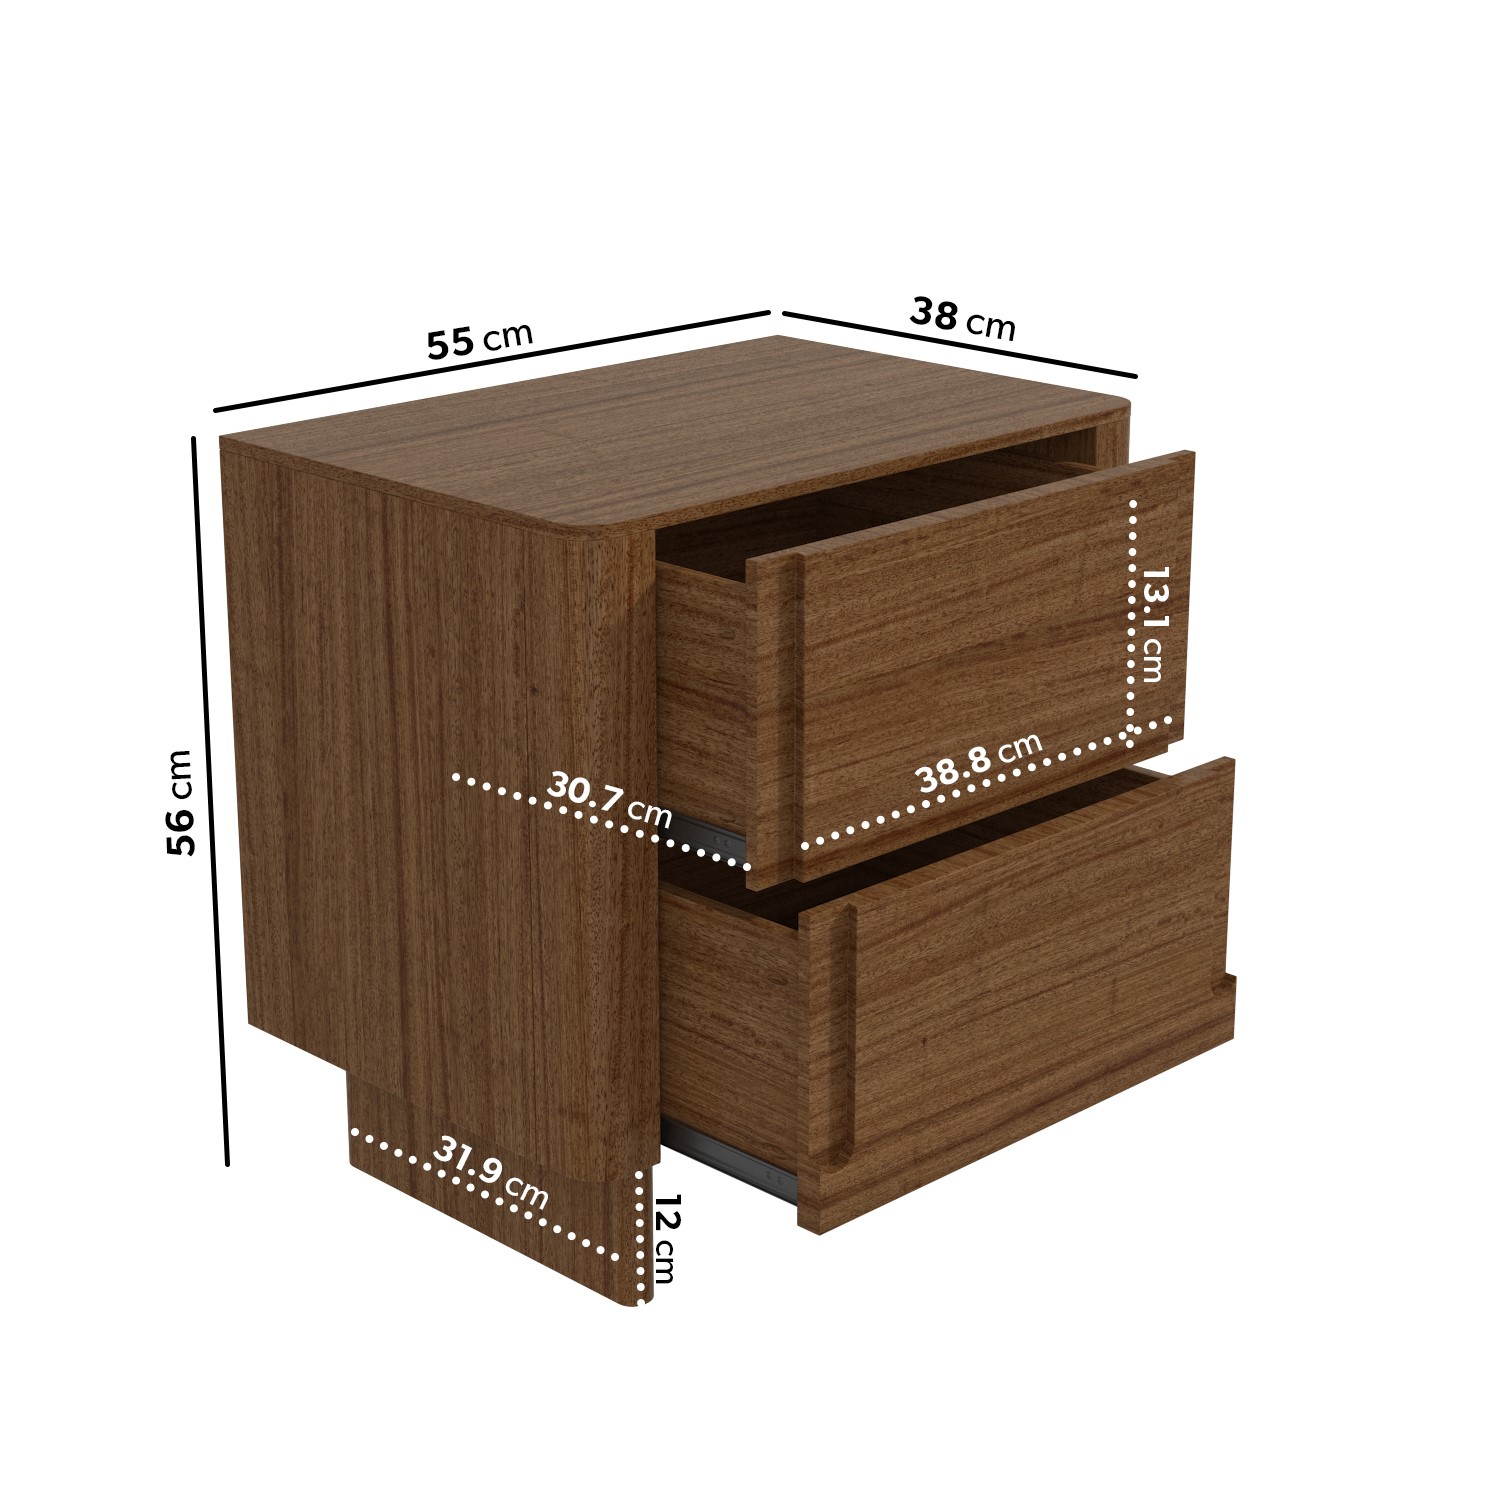 Read more about Dark wood mid century 2 drawer bedside table emile sustainable furniture